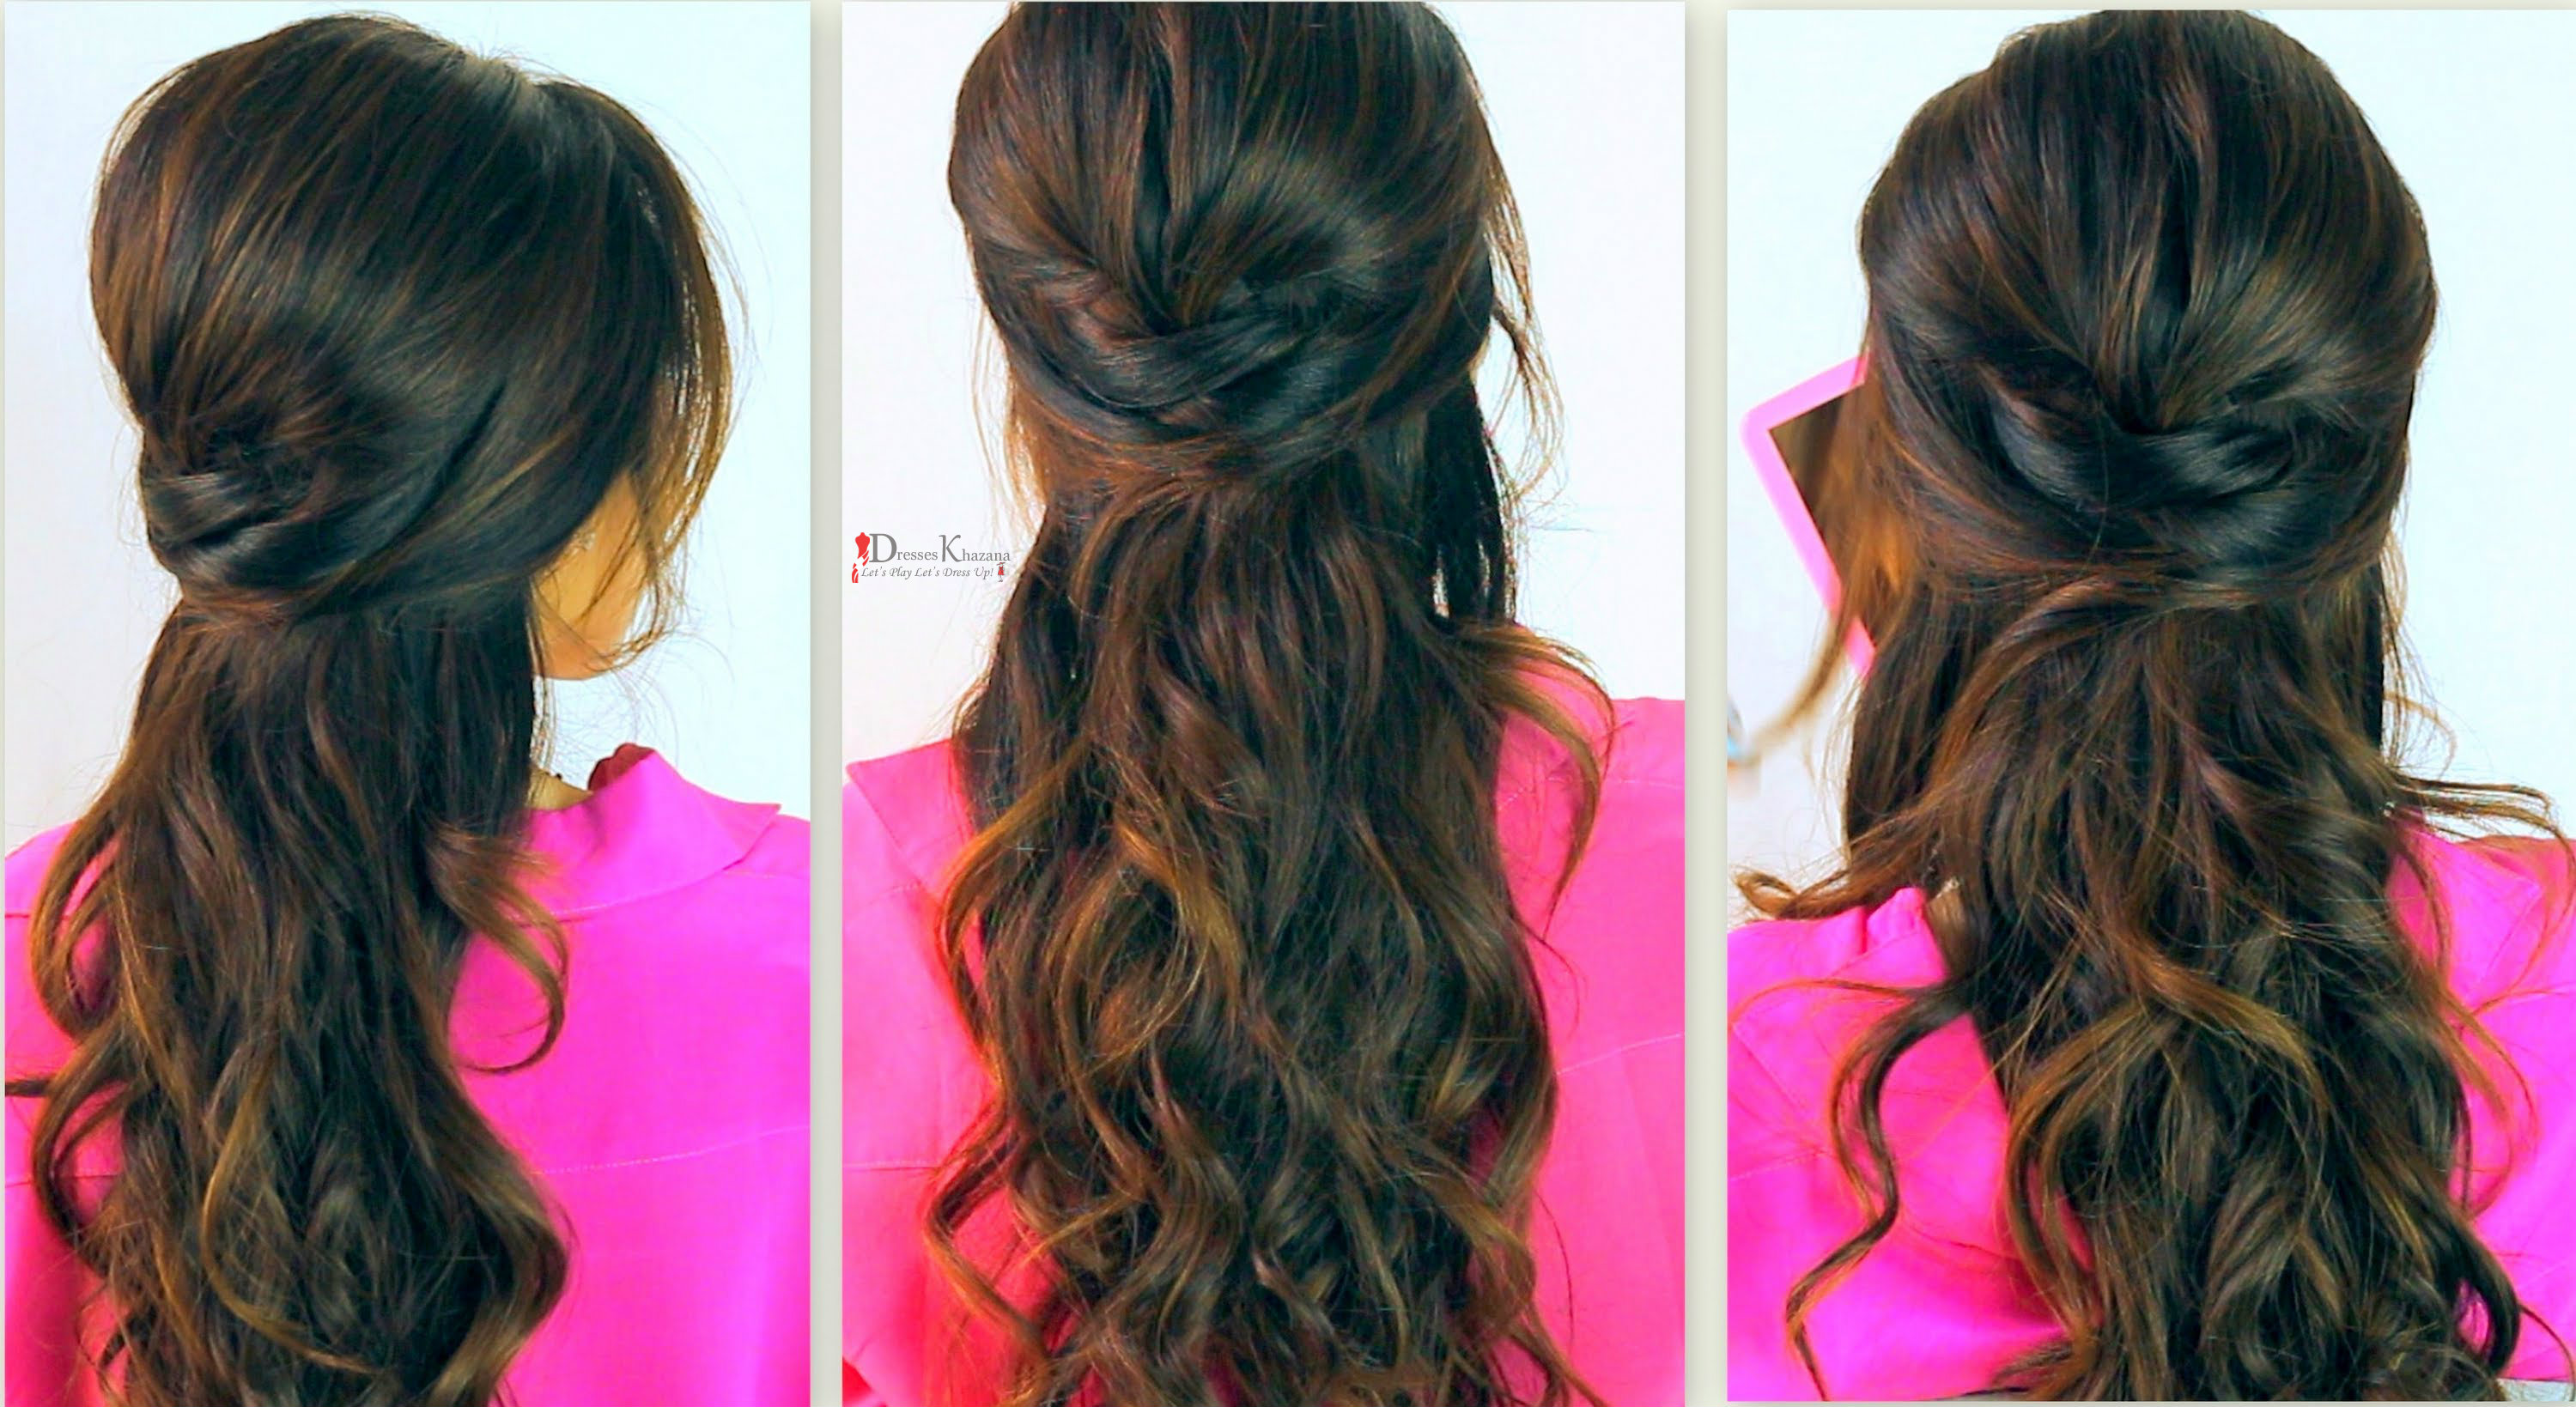 Top 5 Tips for party hairstyles of Long Hair for girls